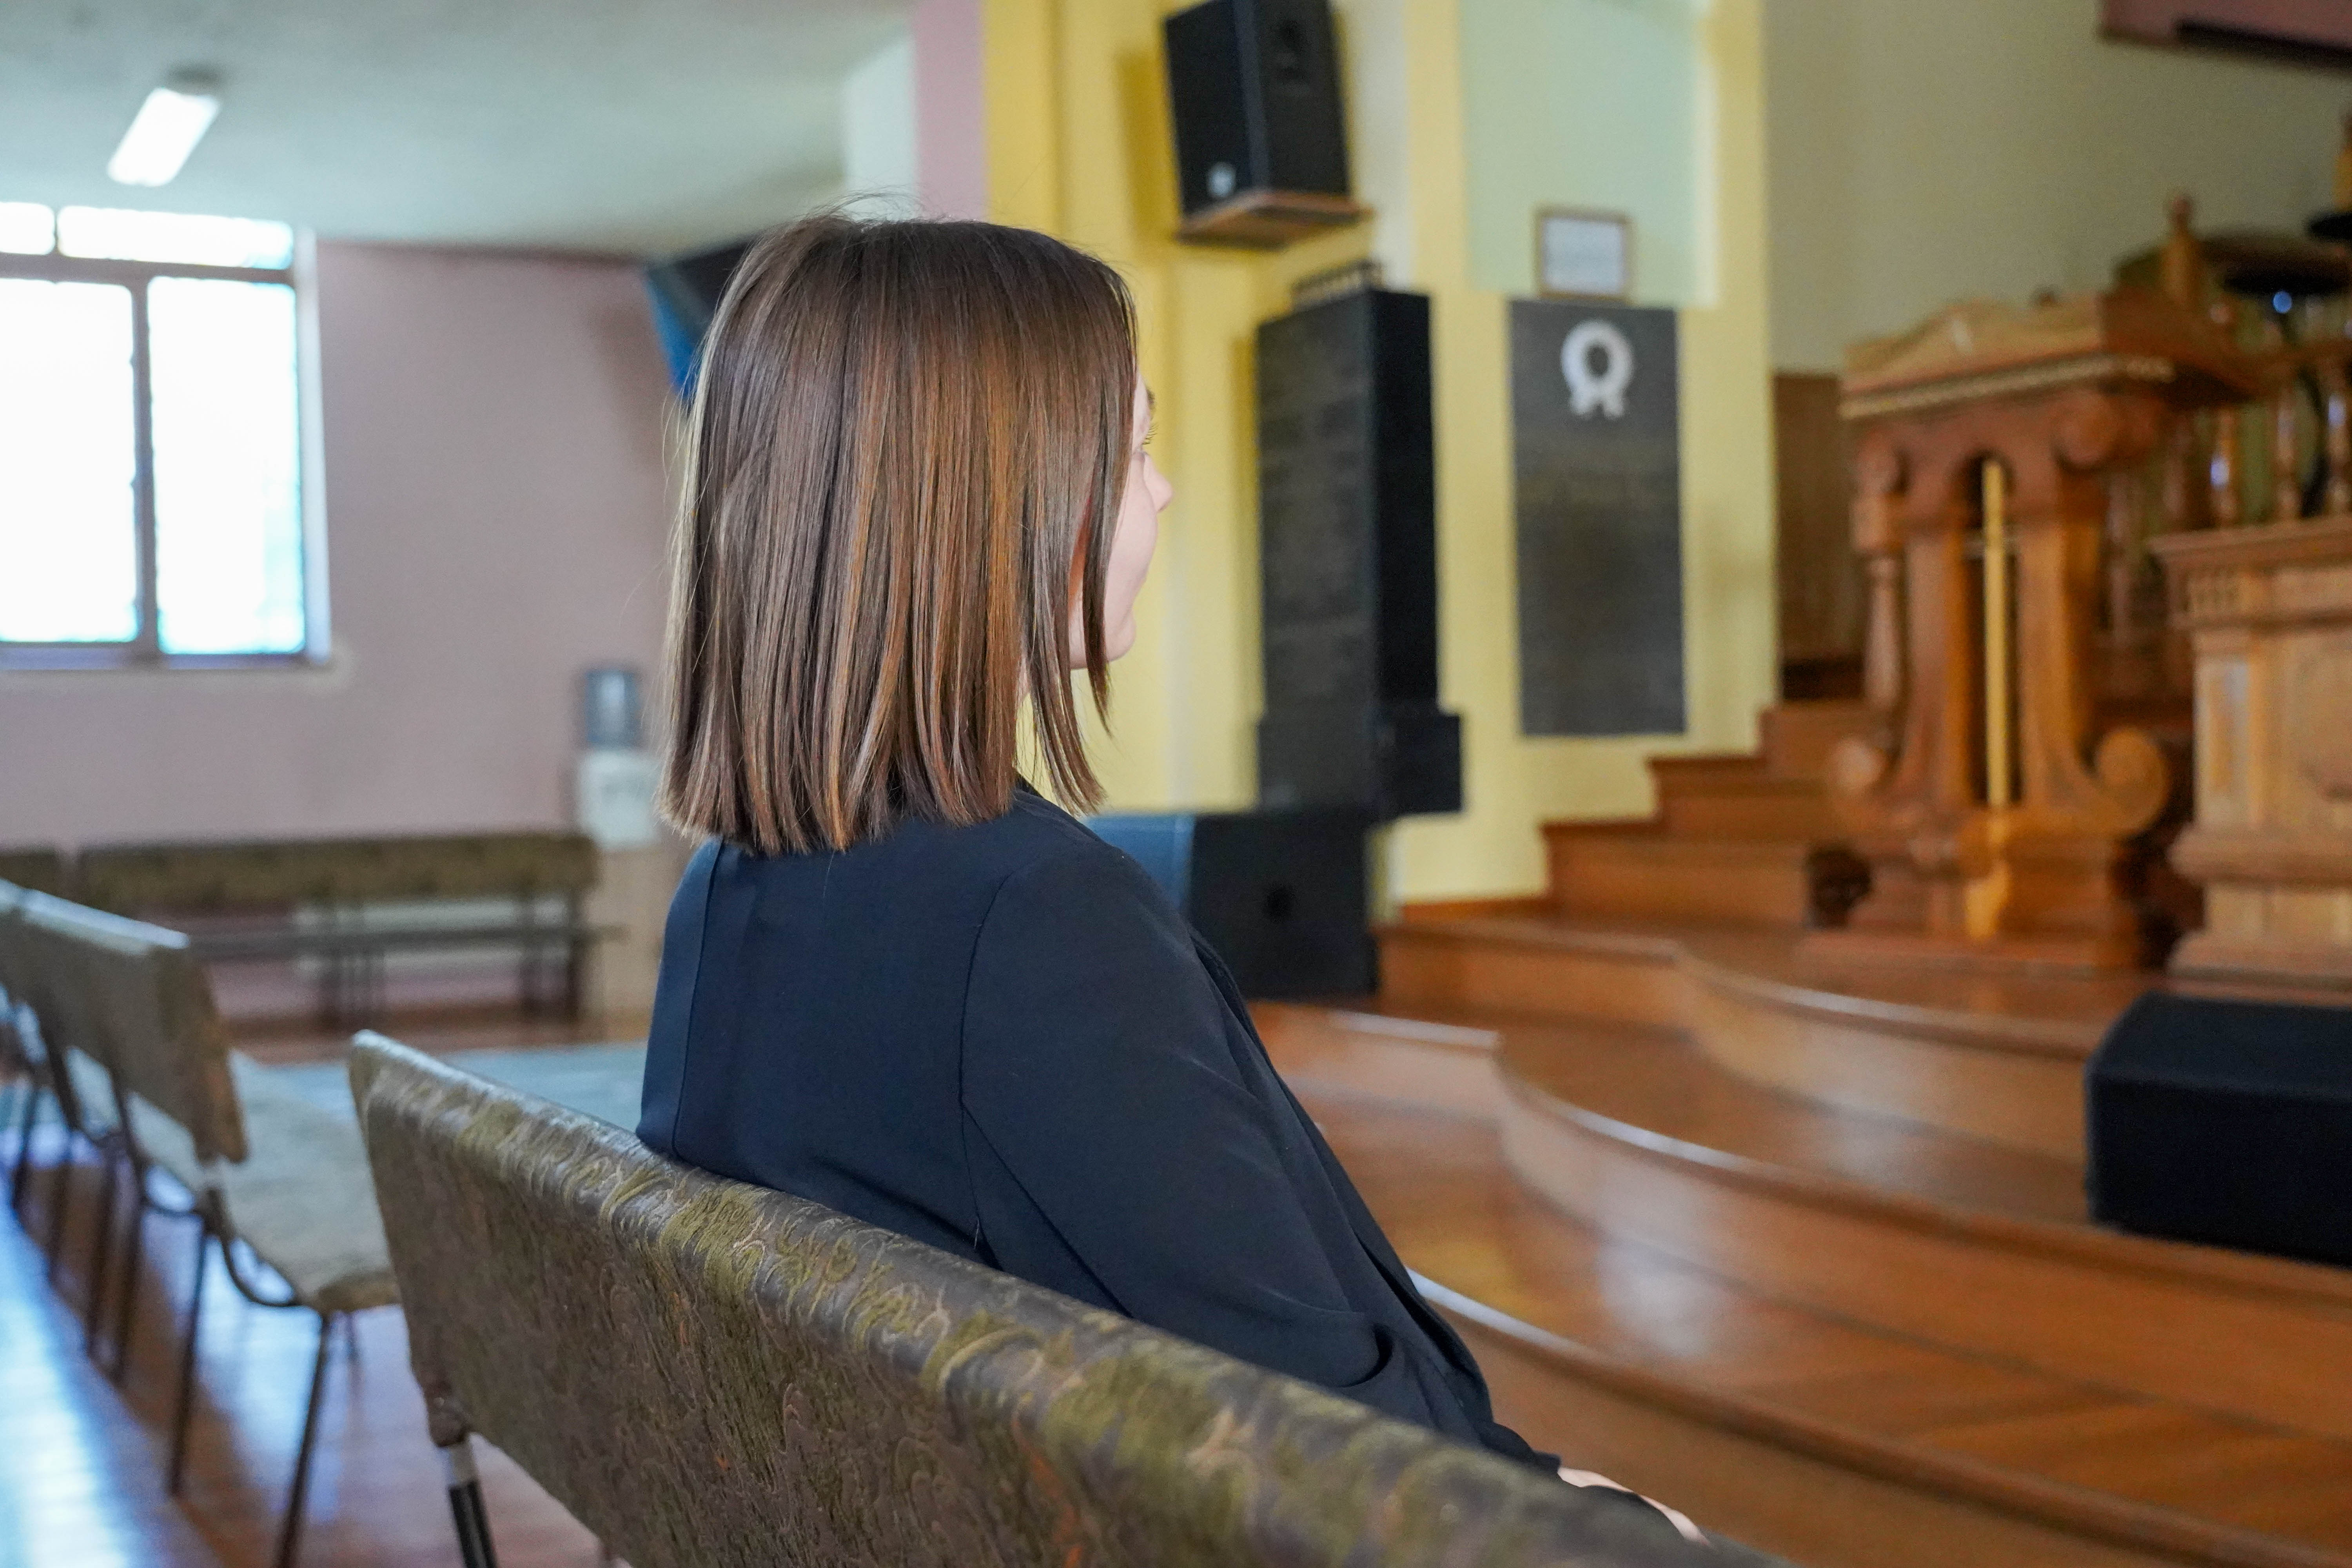 Daryna found comfort in the church during the first three months of the war in Ukraine